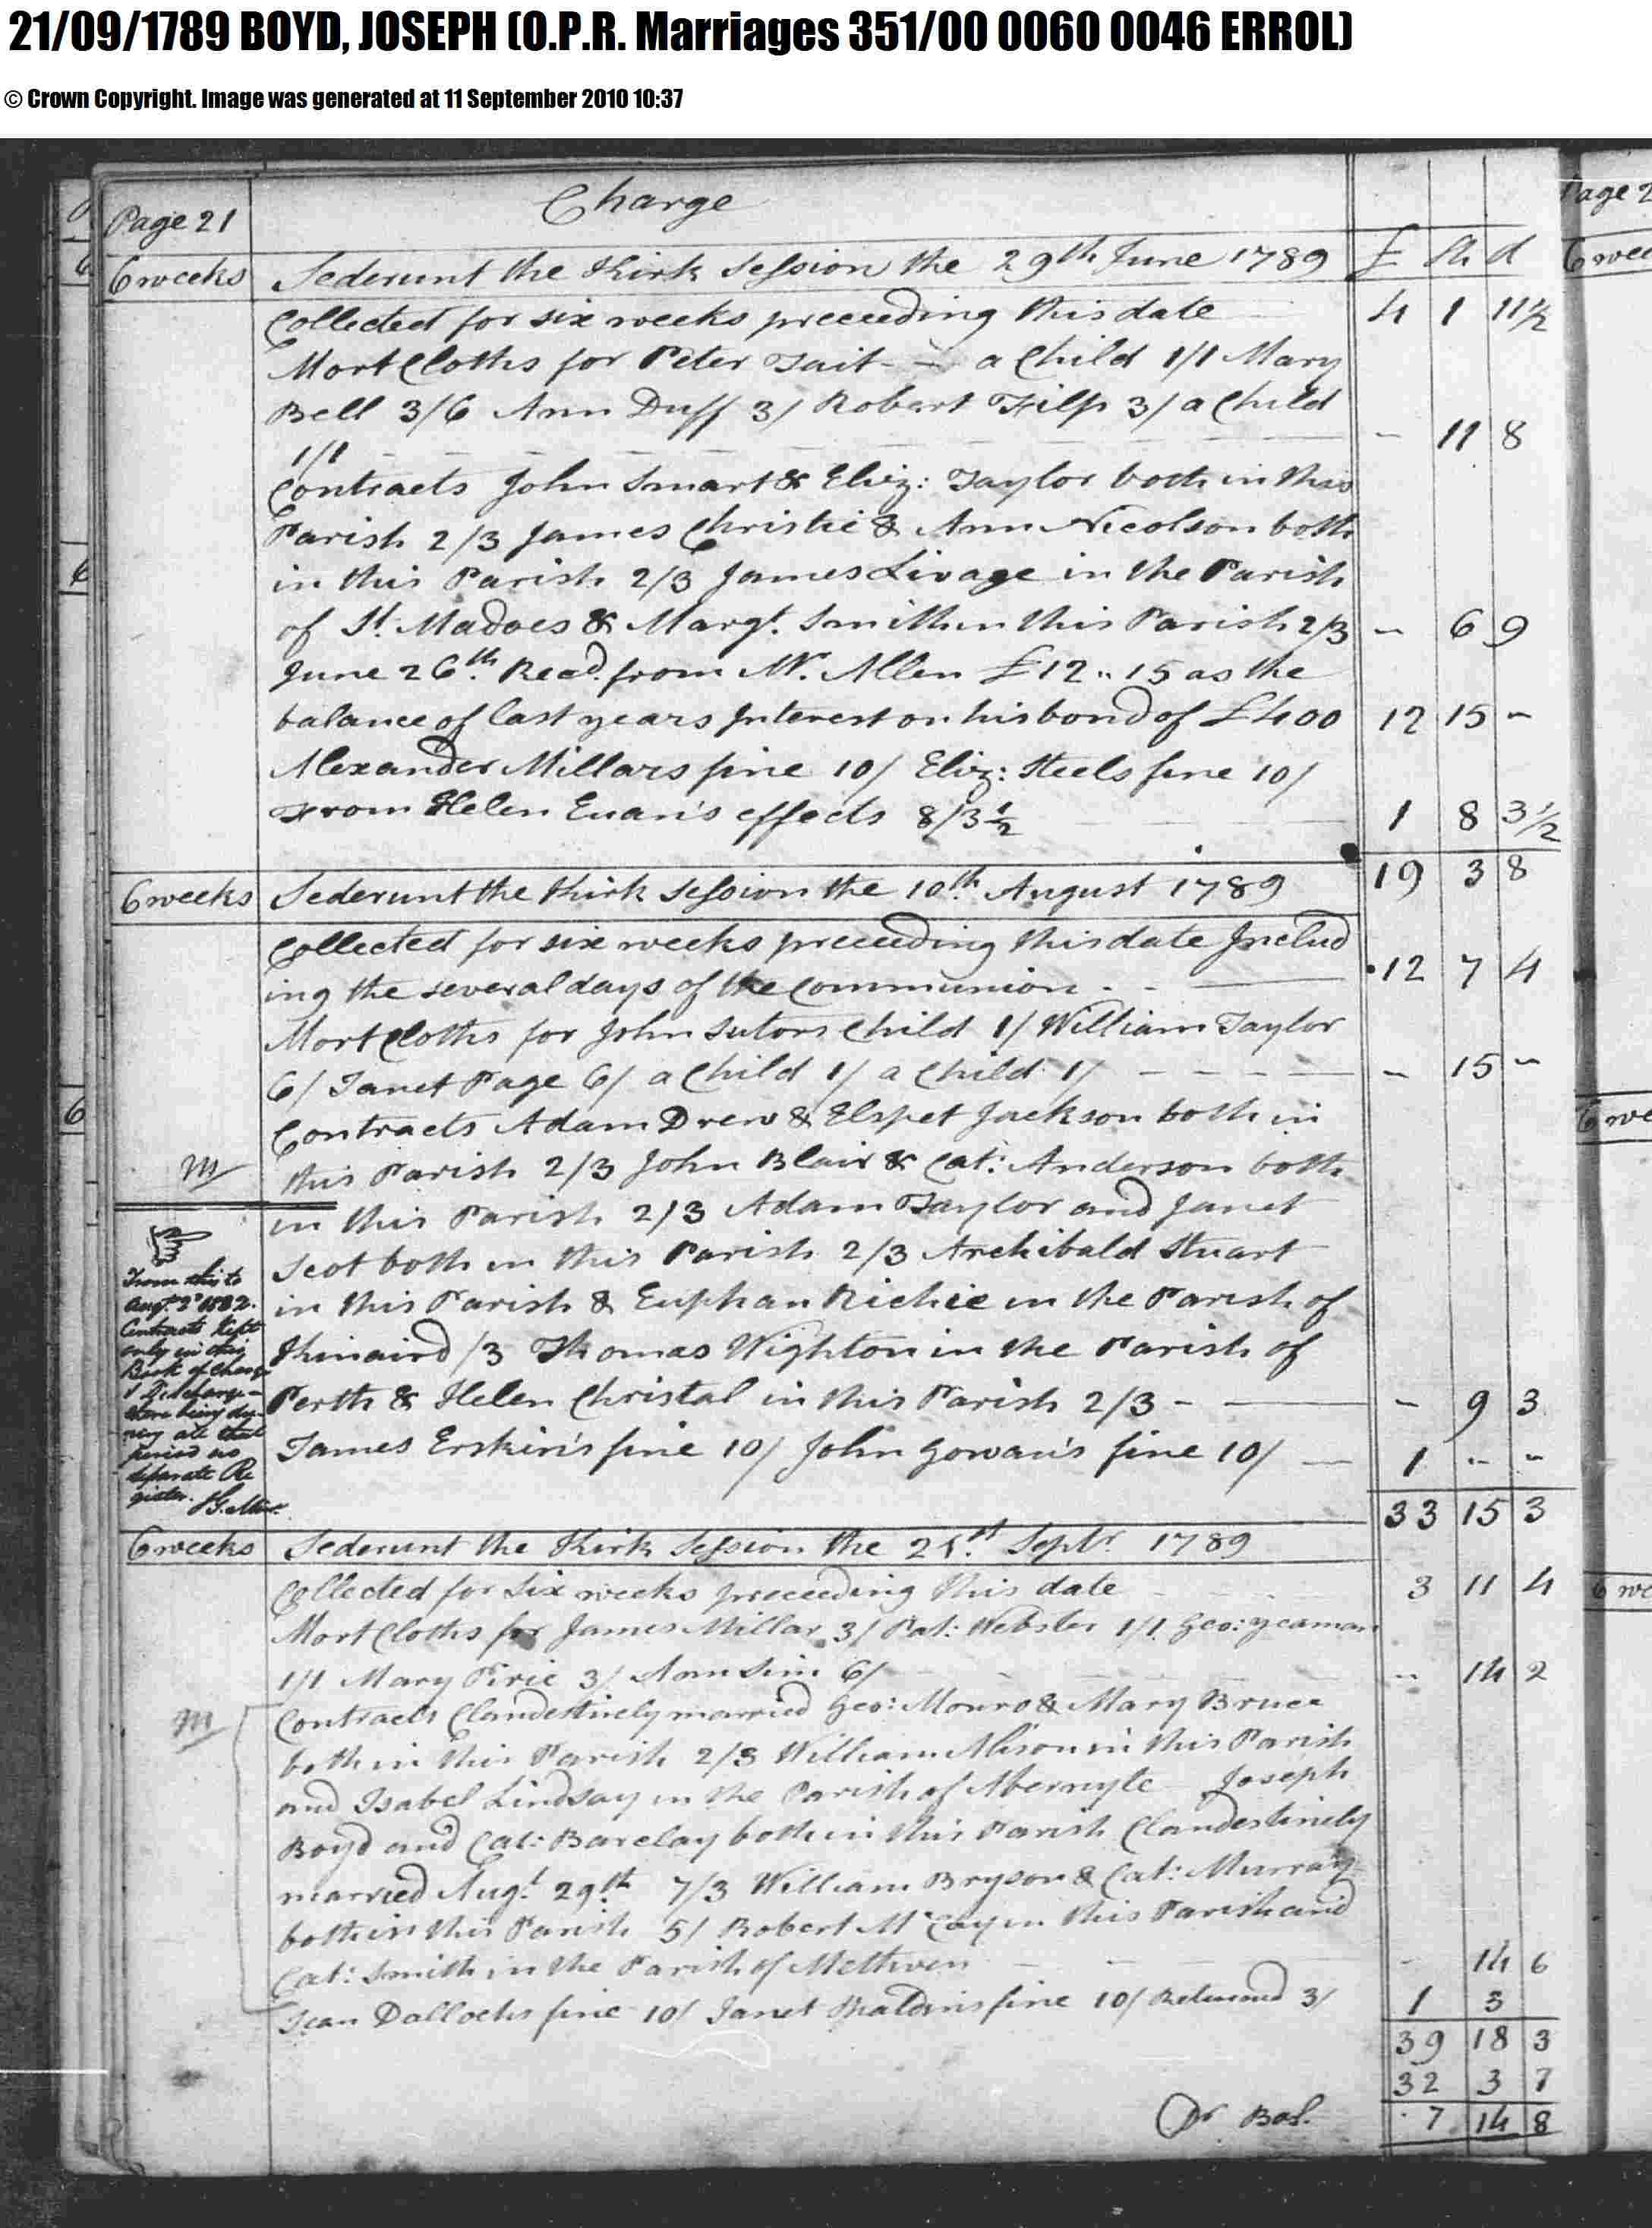 1789 marriage charges of Catherine Barclay to Joseph Boyd